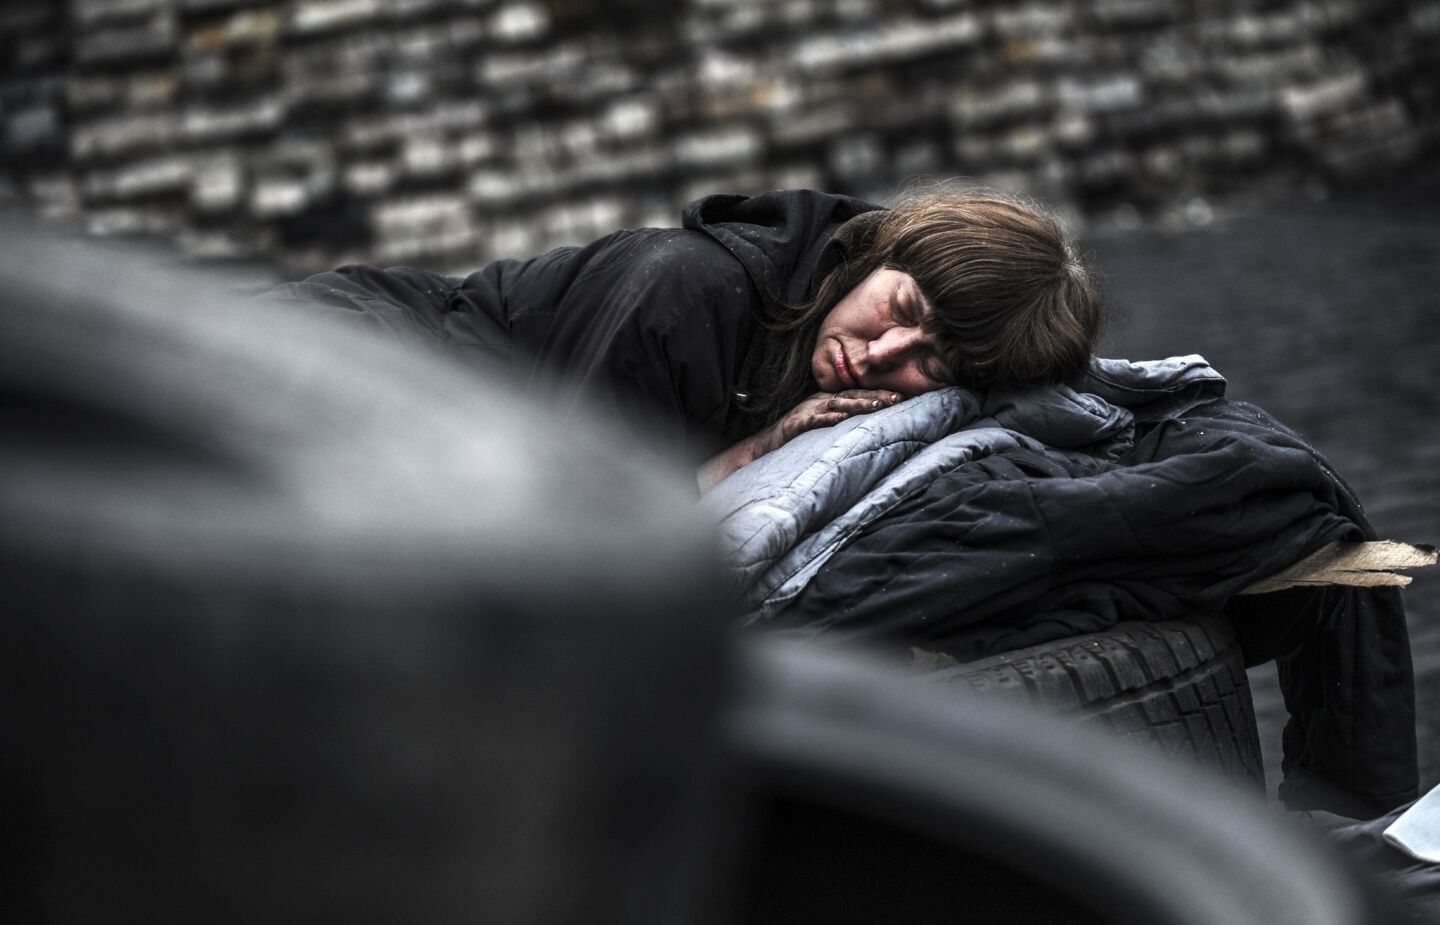 A woman sleeps behind a barricade on Kiev's Independence square.